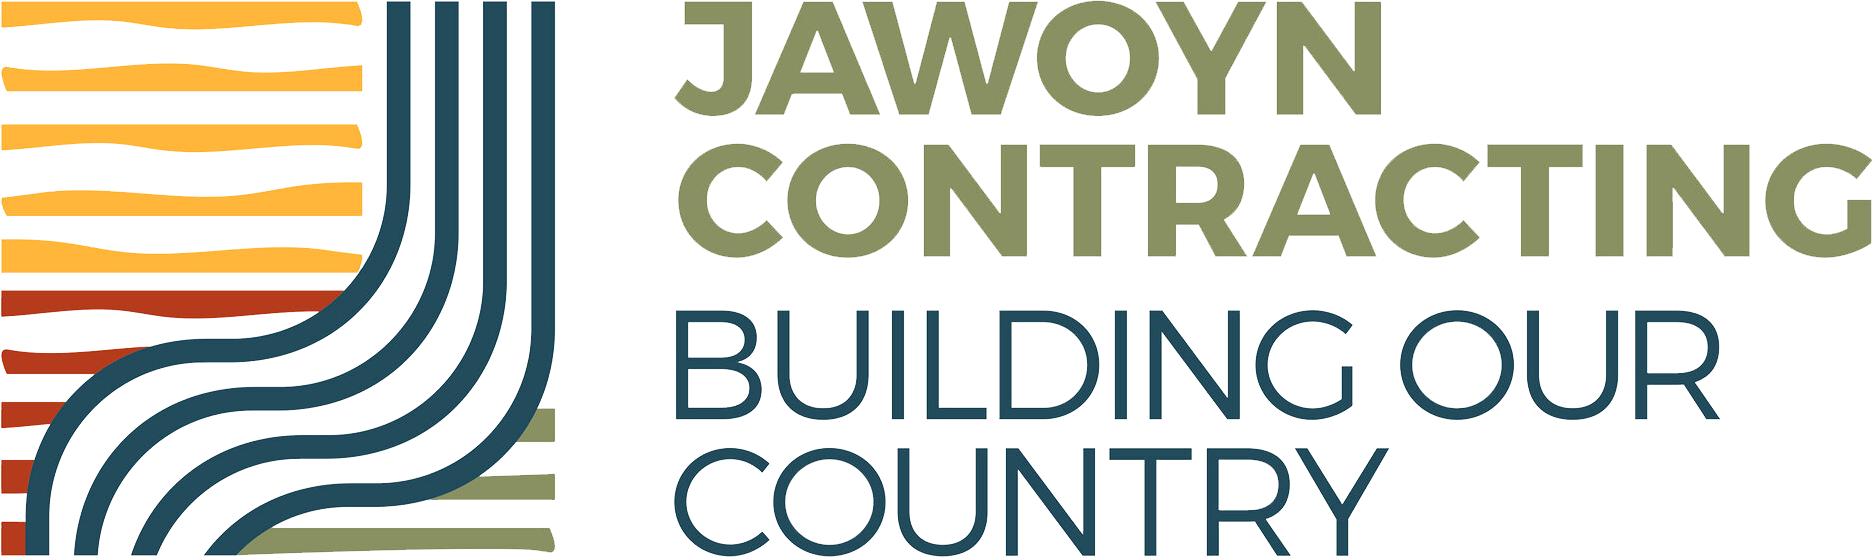 Jawoyn Contracting Logo high res